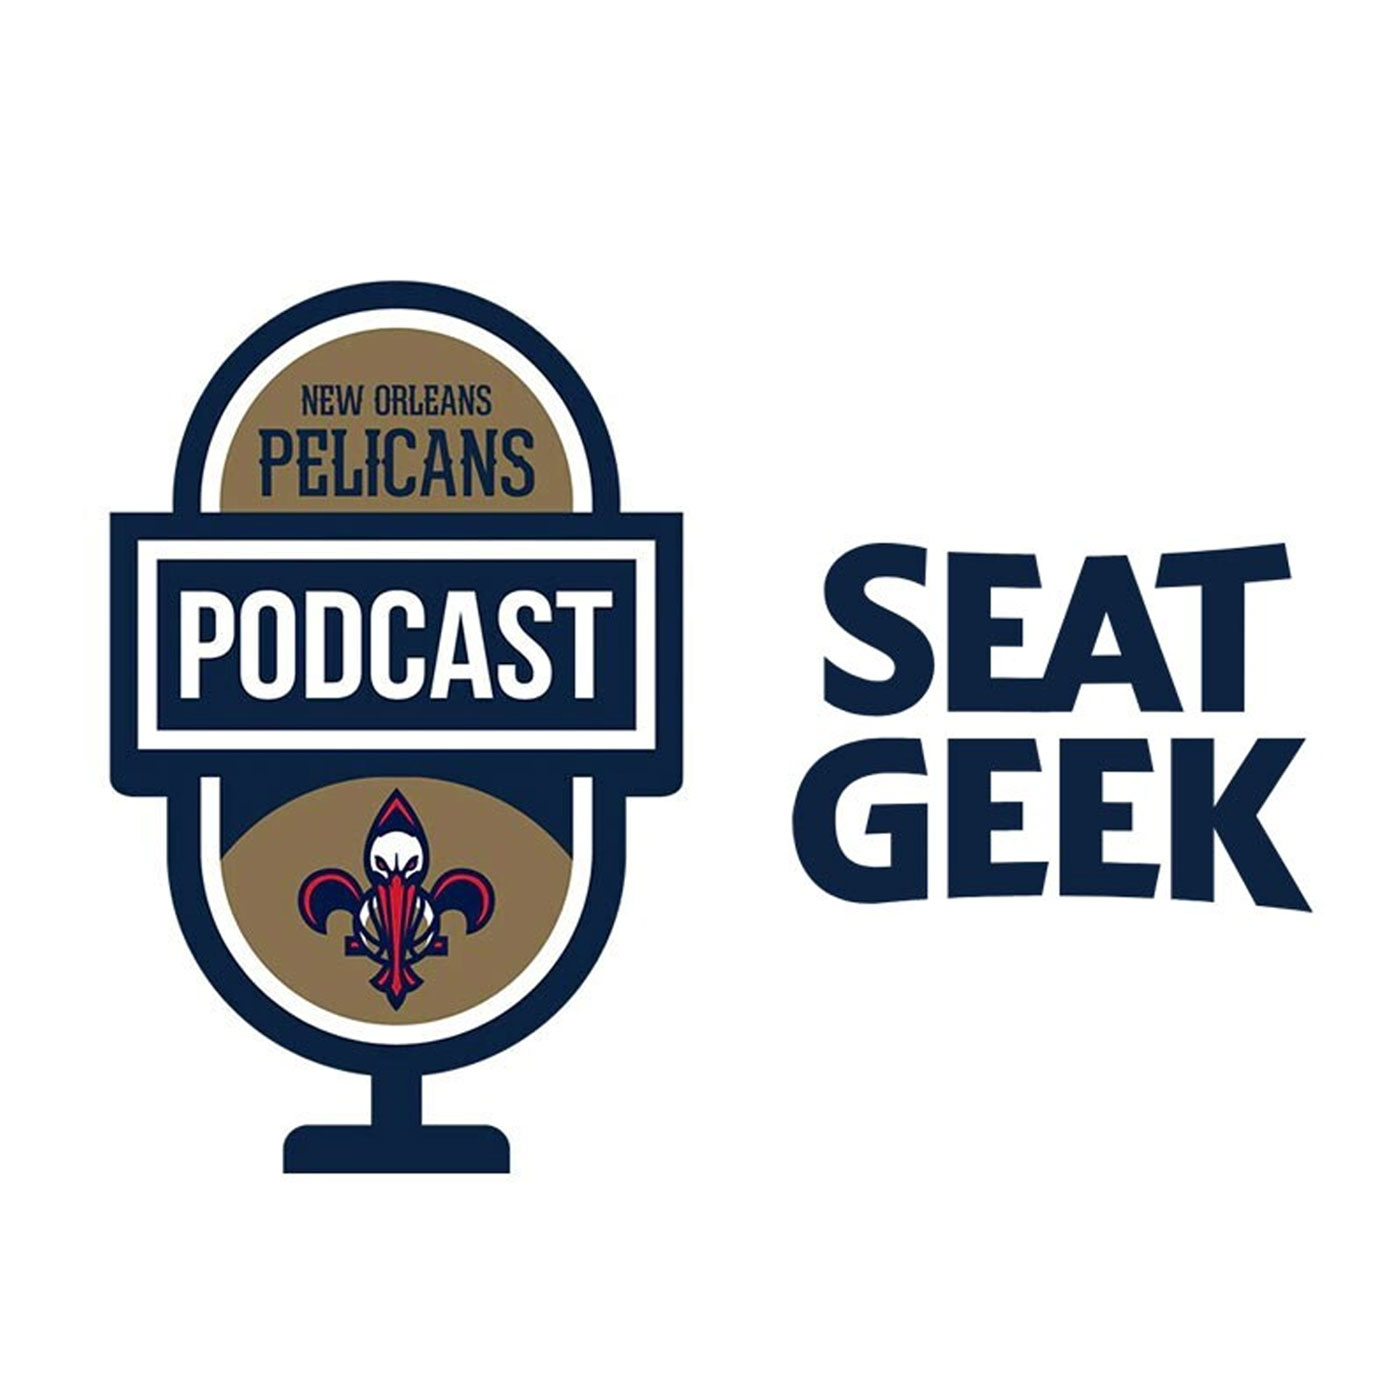 Sean Kelley on the New Orleans Pelicans Podcast presented by SeatGeek - April 26, 2022